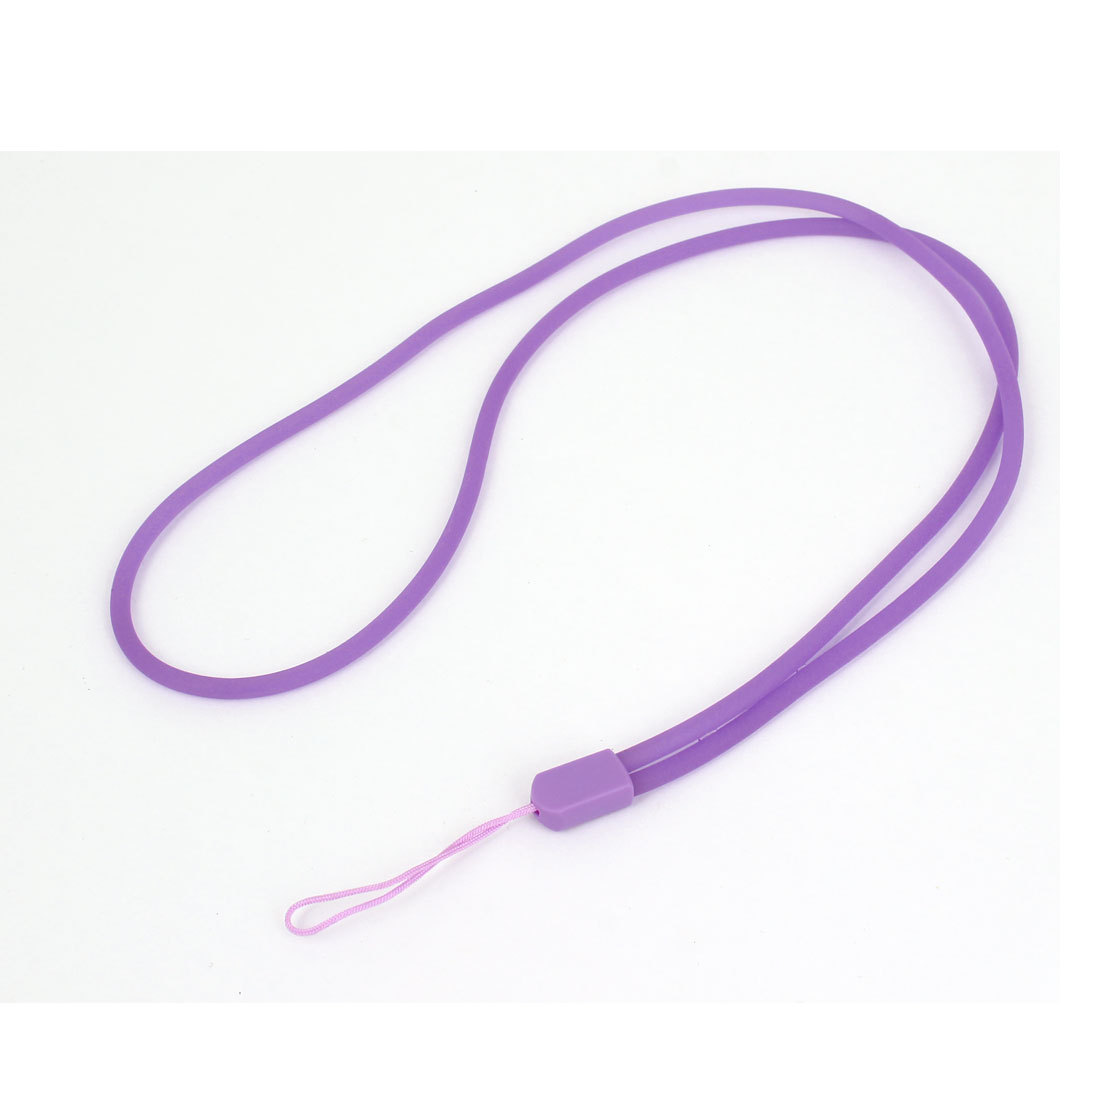 uxcell strap strap hang rope si Ricoh n nylon mobile telephone equipment ornament character row -stroke ring purple 